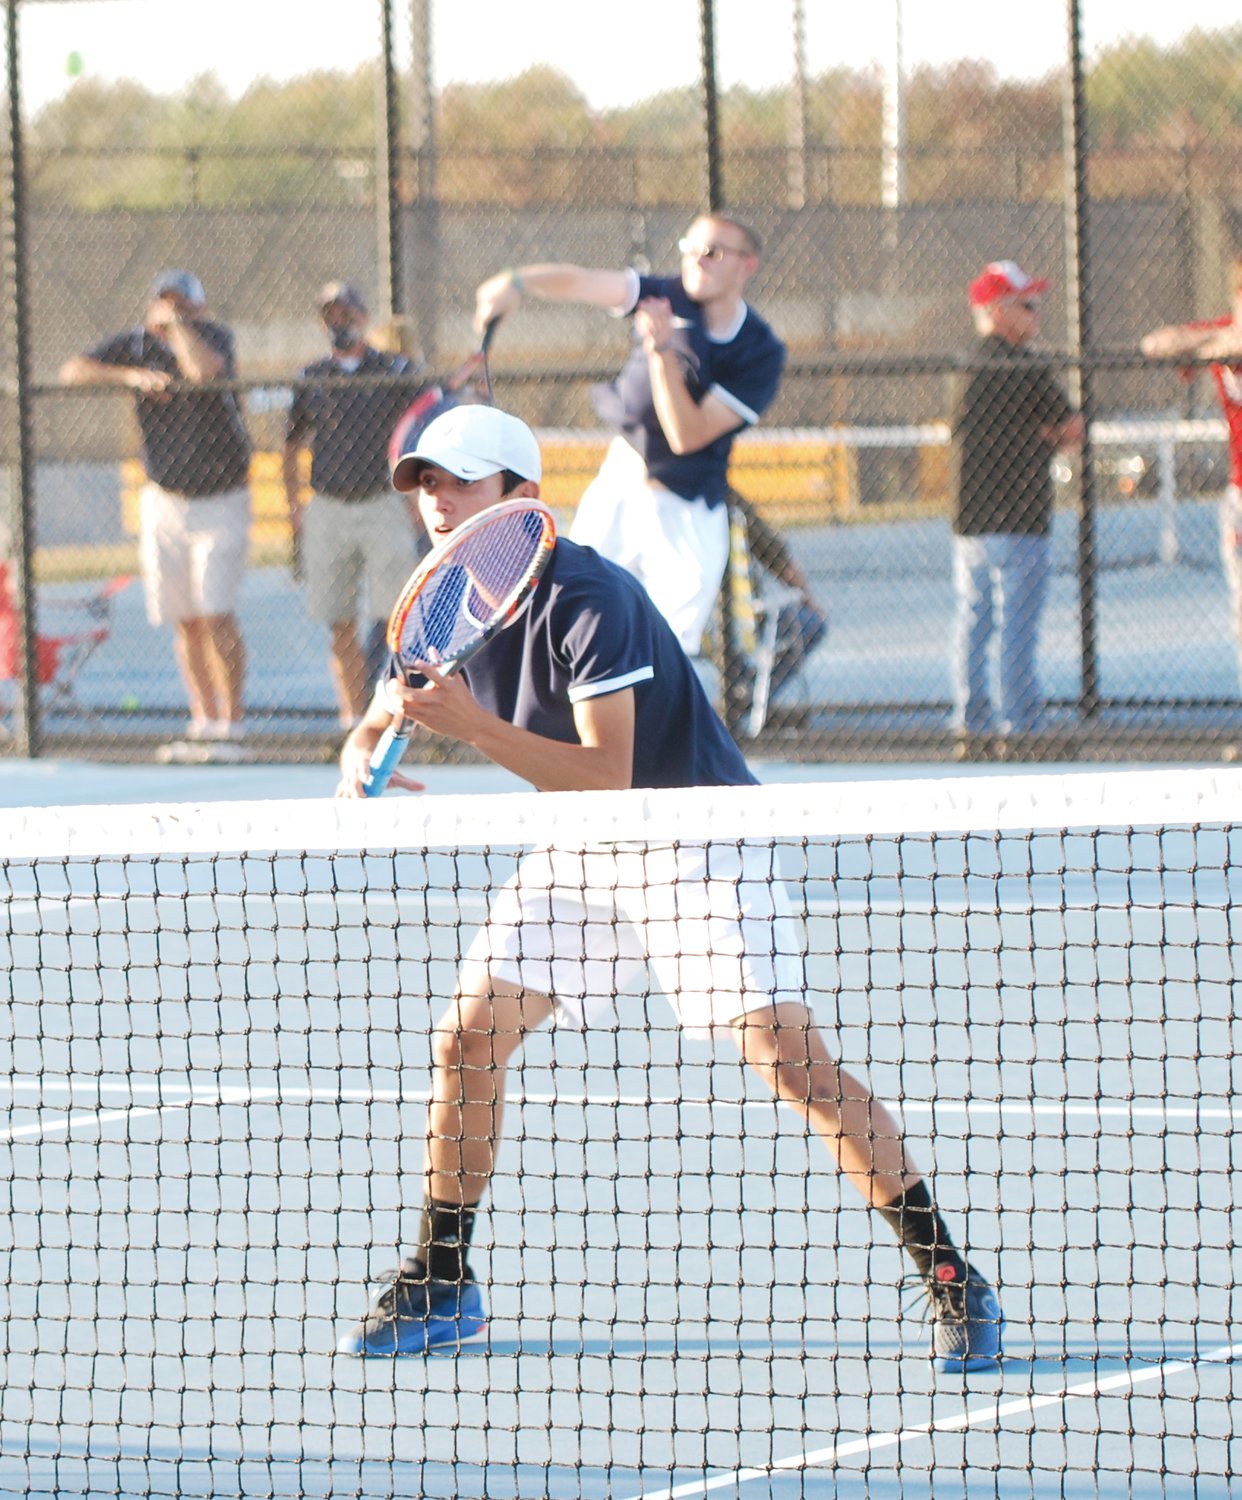 Fountain Central seniors Jacob Keeling and CJ Yager teamed up to defeat Southmont's Micah Korhorn and Mason Hall at No. 1 doubles on Tuesday.